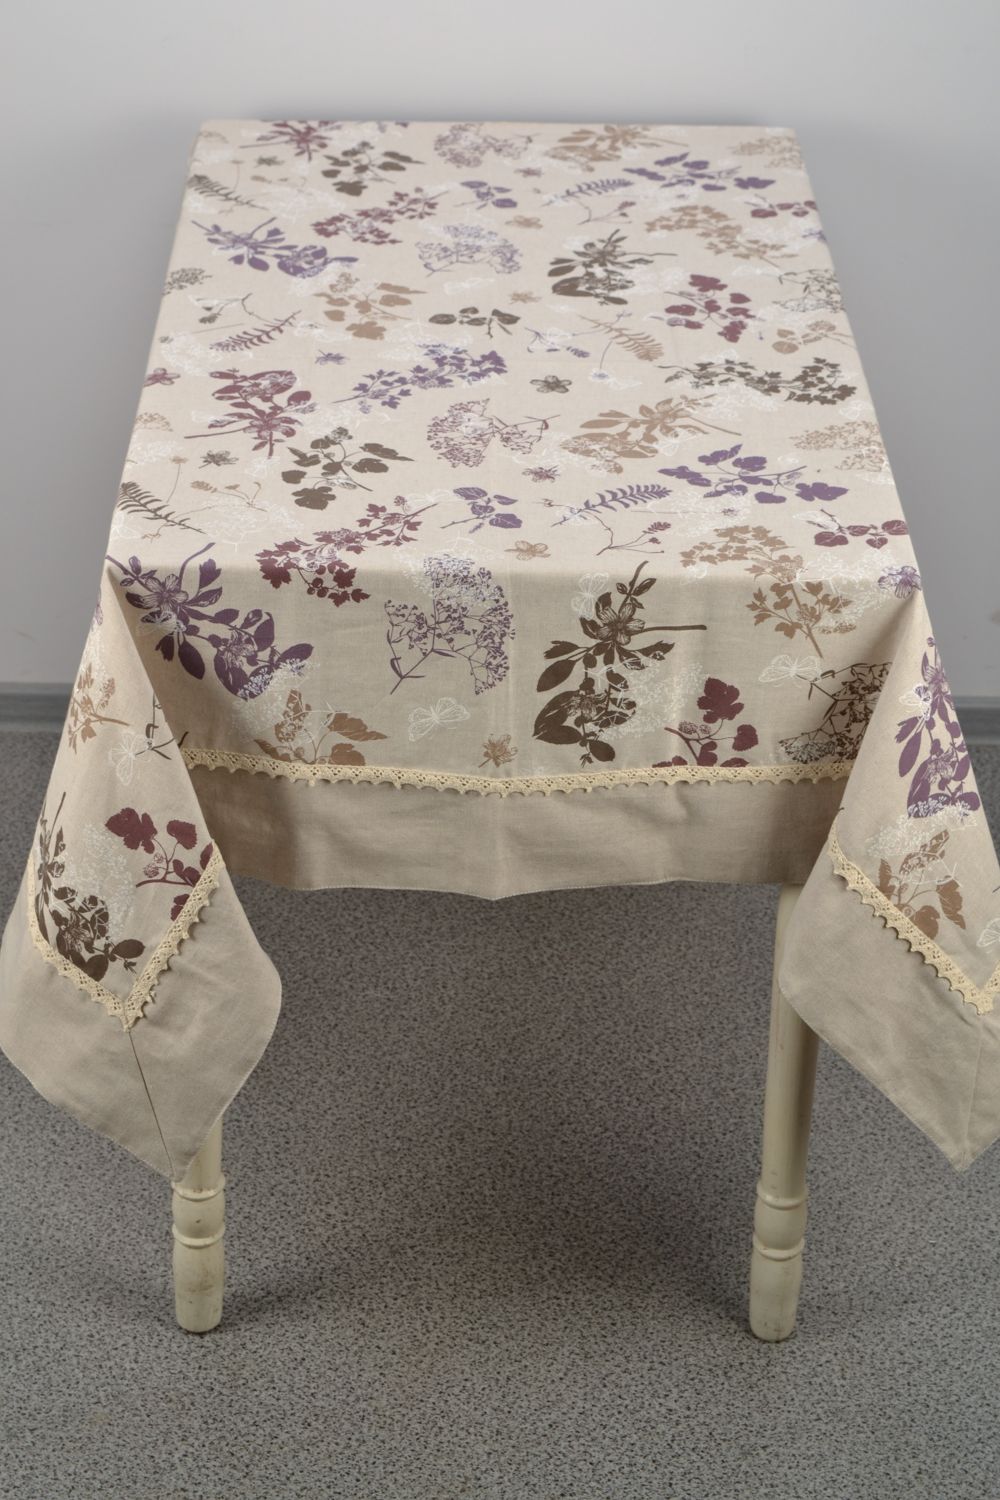 Handmade cotton and polyamide tablecloth with floral print photo 1